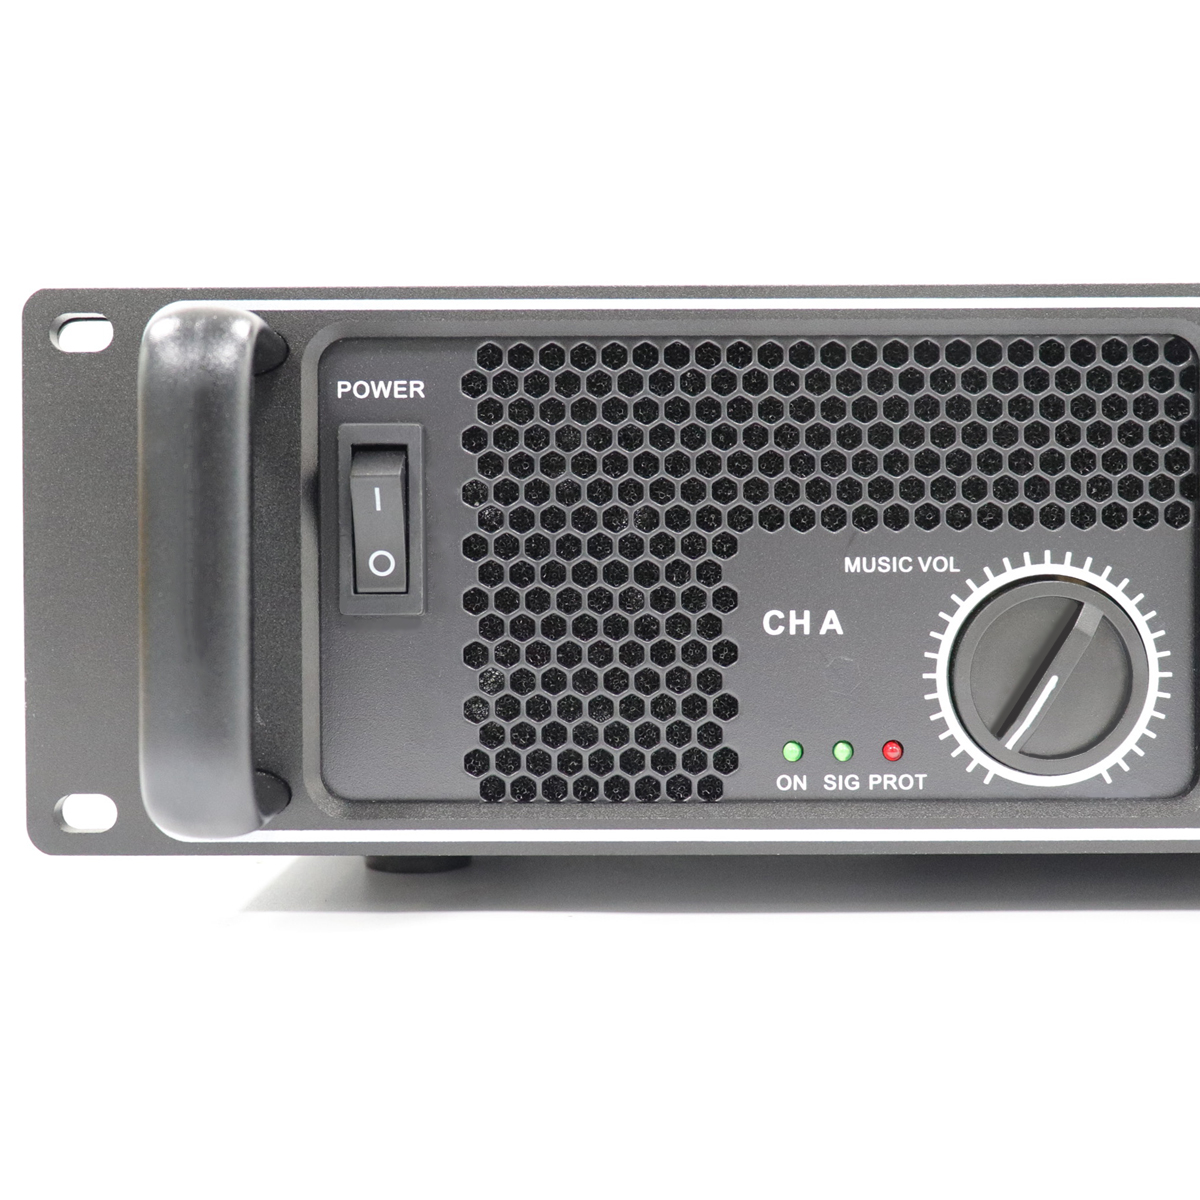 Stock Available 200W Dual channel Professional amplifier for conference rooms, CS-4000